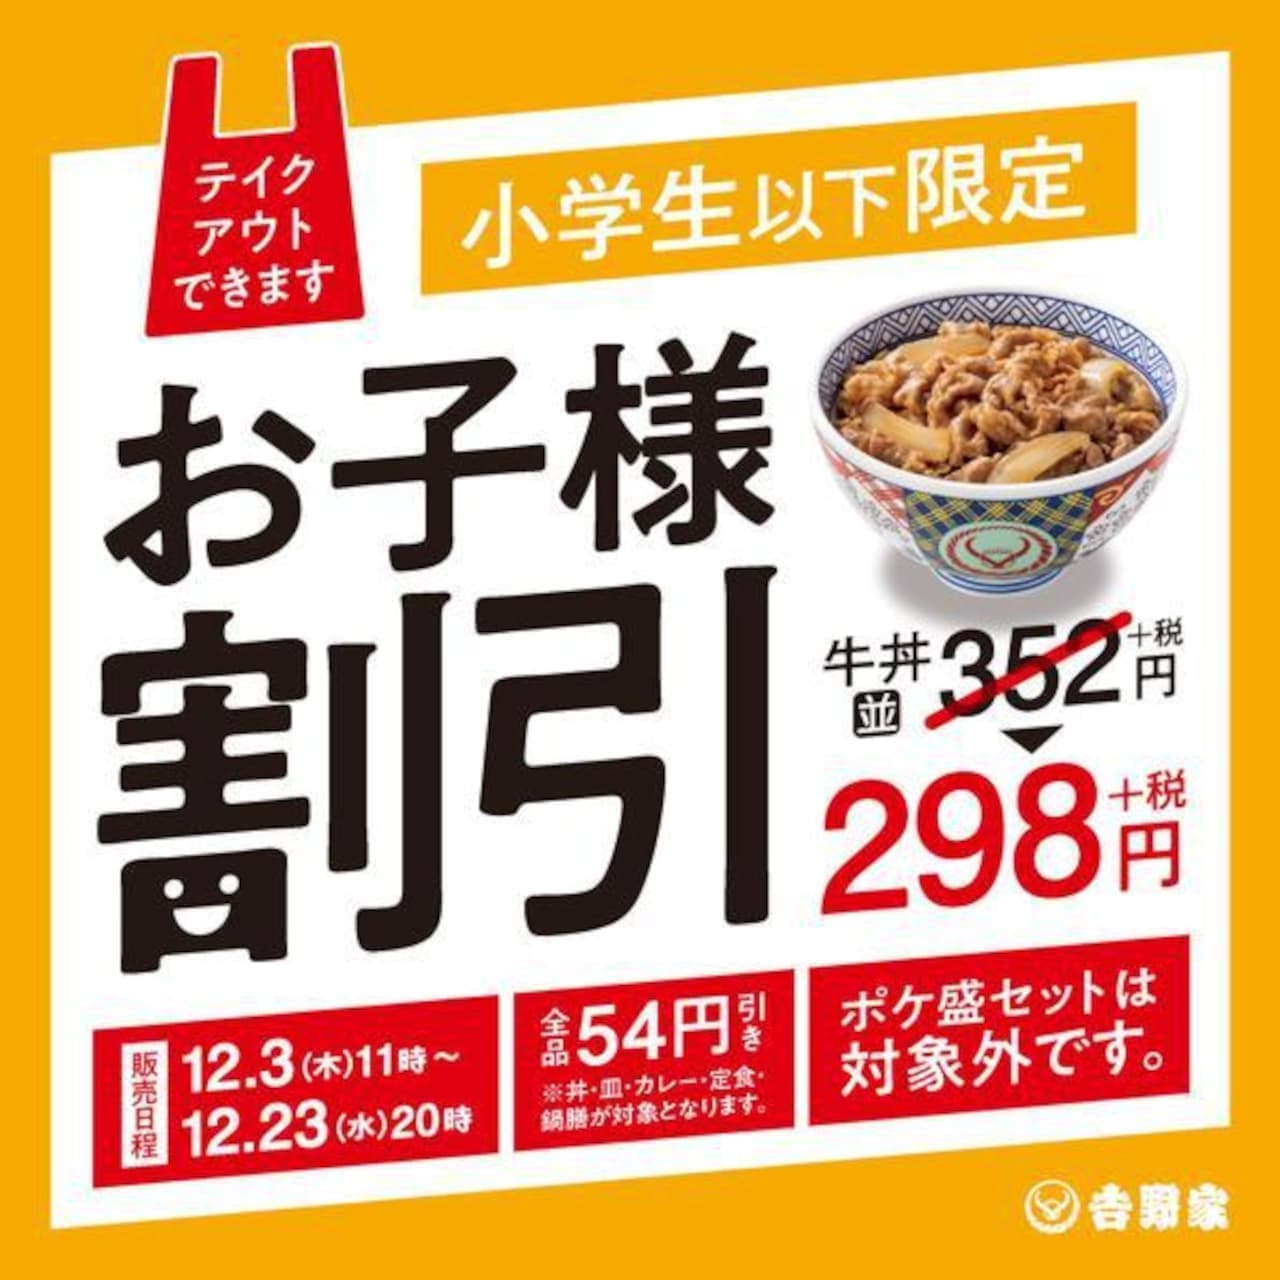 Yoshinoya "Children Discount" for a limited time